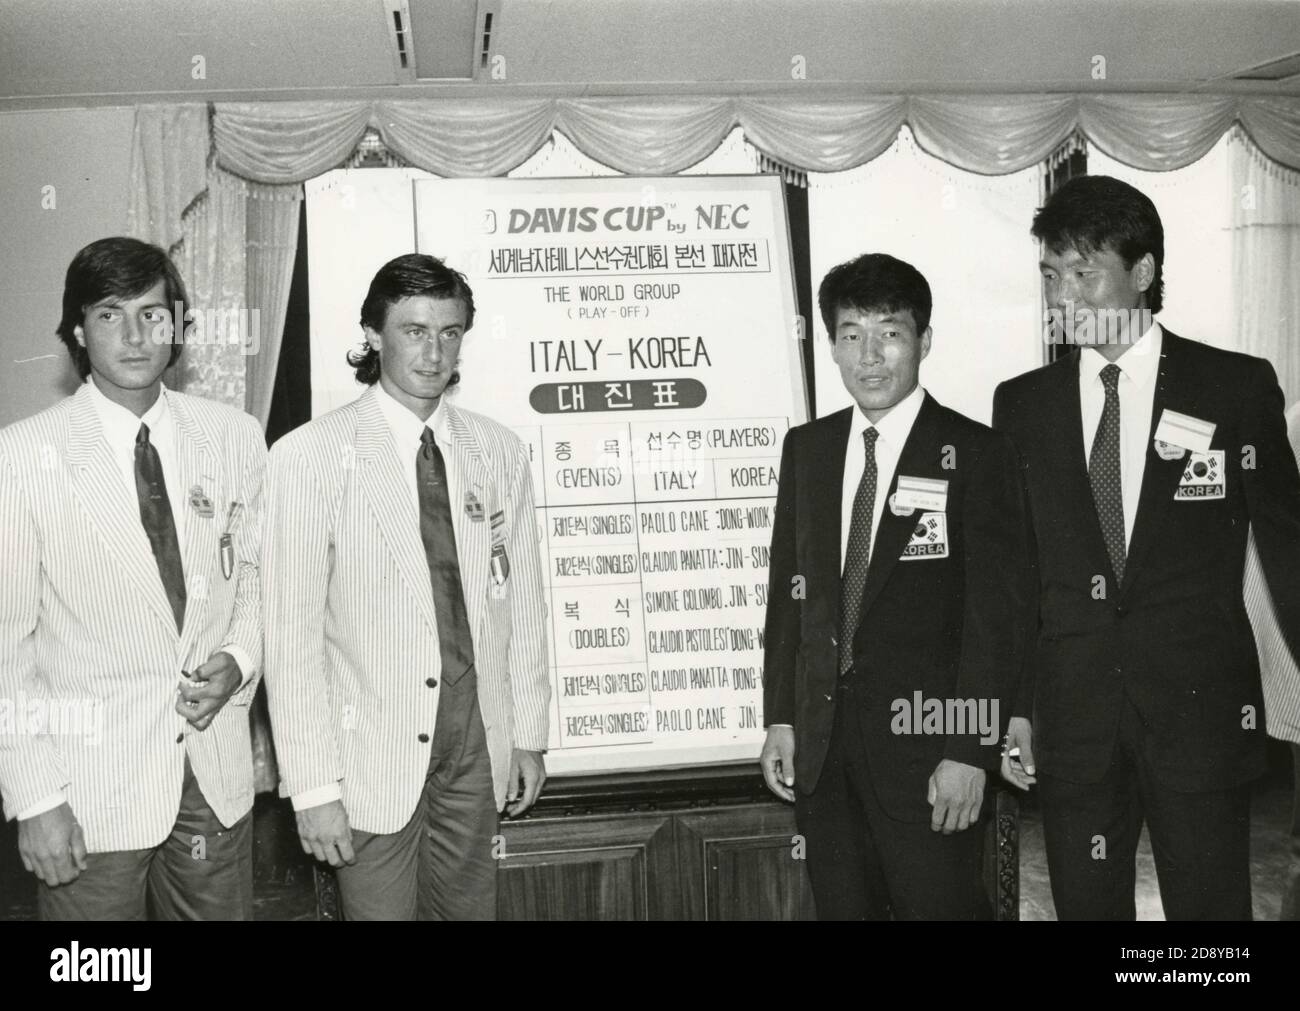 The Italian team Claudio Panatta and Paolo Canè and the Korean team Dong-wook Song and Jin-Sung Yoo at the Davis Cup, Seul, Korea 1987 Stock Photo